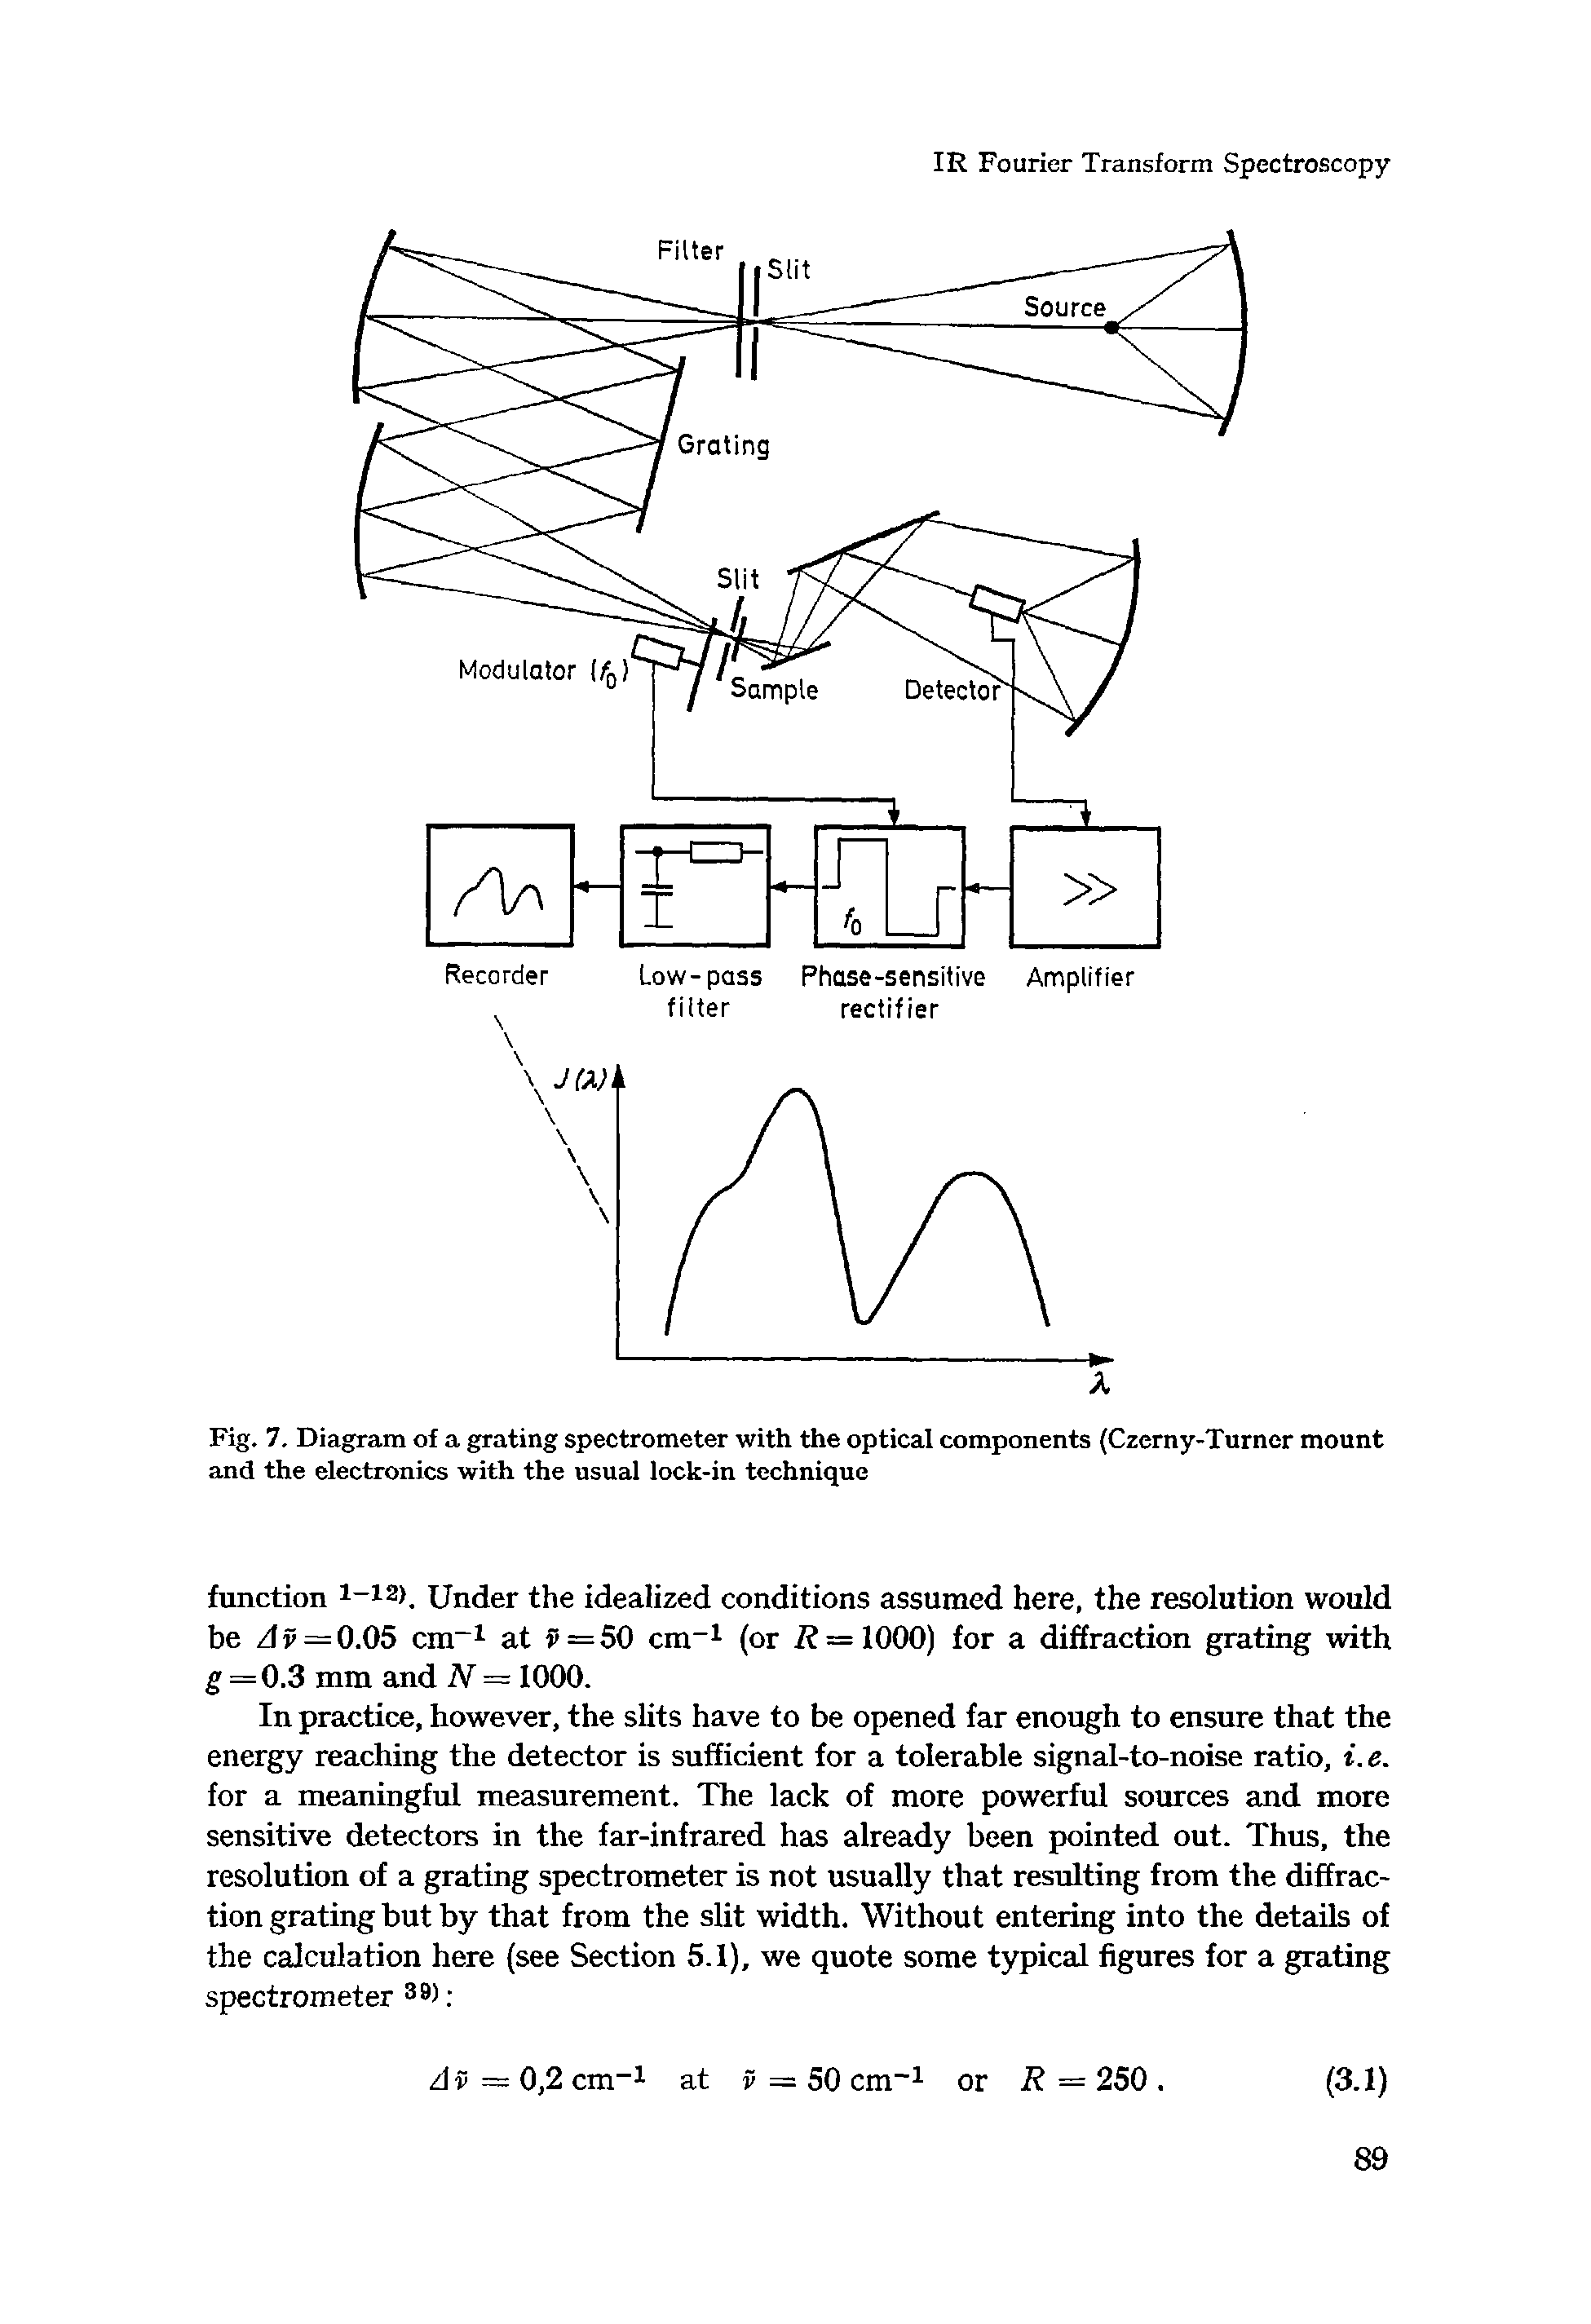 Fig. 7. Diagram of a grating spectrometer with the optical components (Czerny-Turner mount and the electronics with the usual lock-in technique...